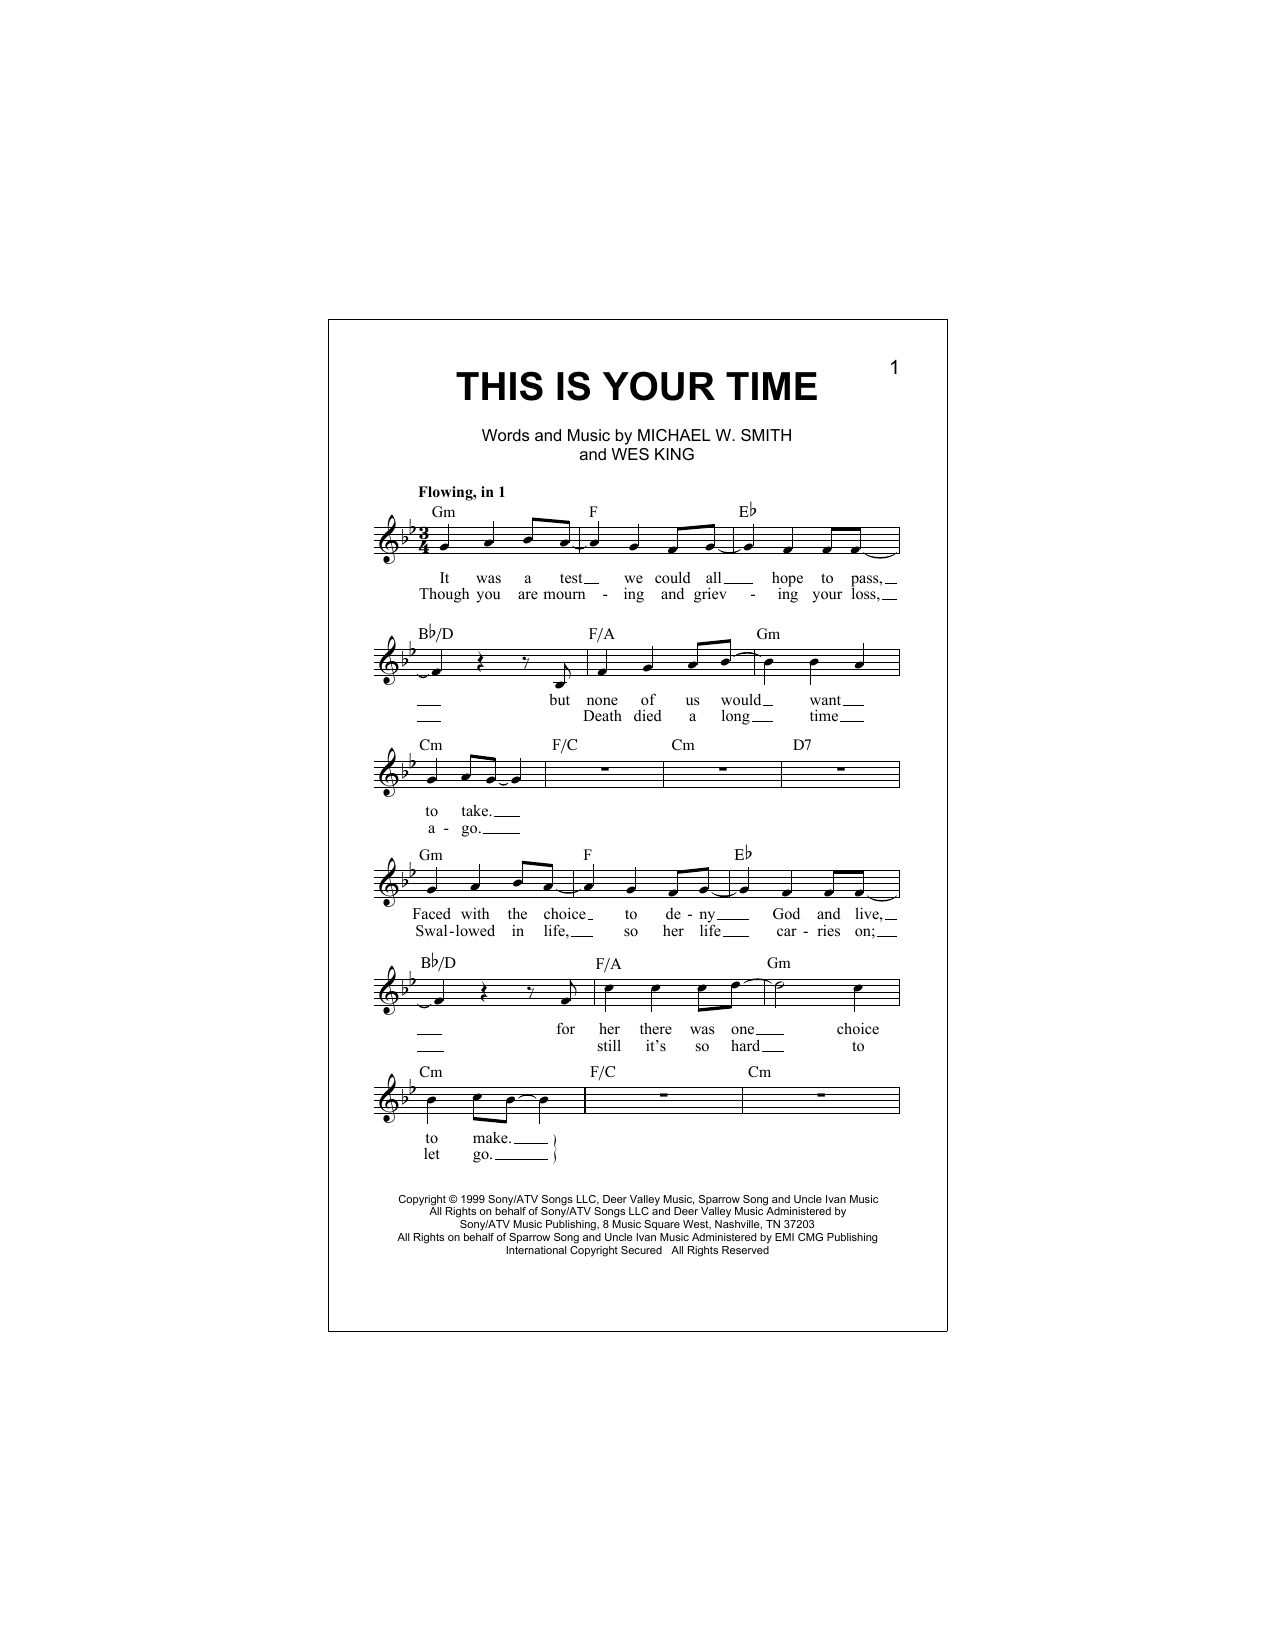 Download Michael W. Smith This Is Your Time Sheet Music